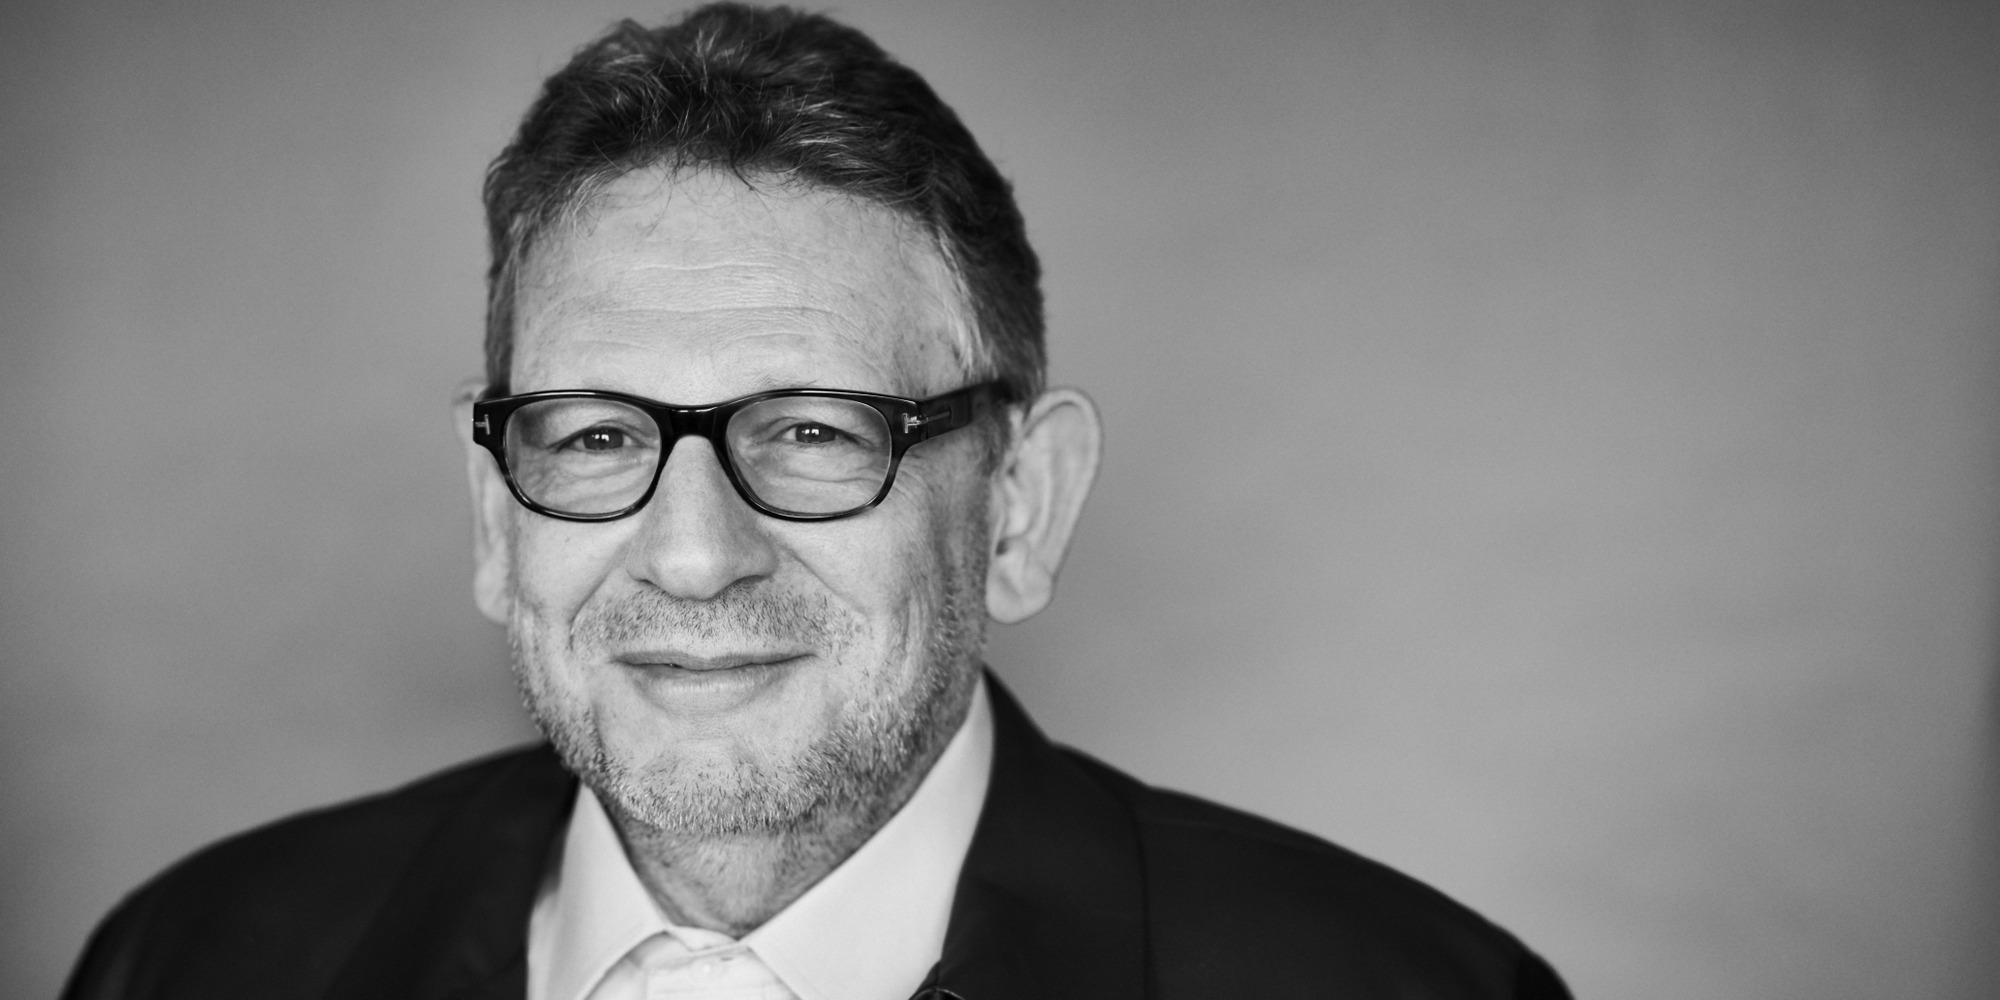 As YouTube Publishes AI Principles, UMG’s Lucian Grainge Talks Potential to ‘Amplify Human Imagination’